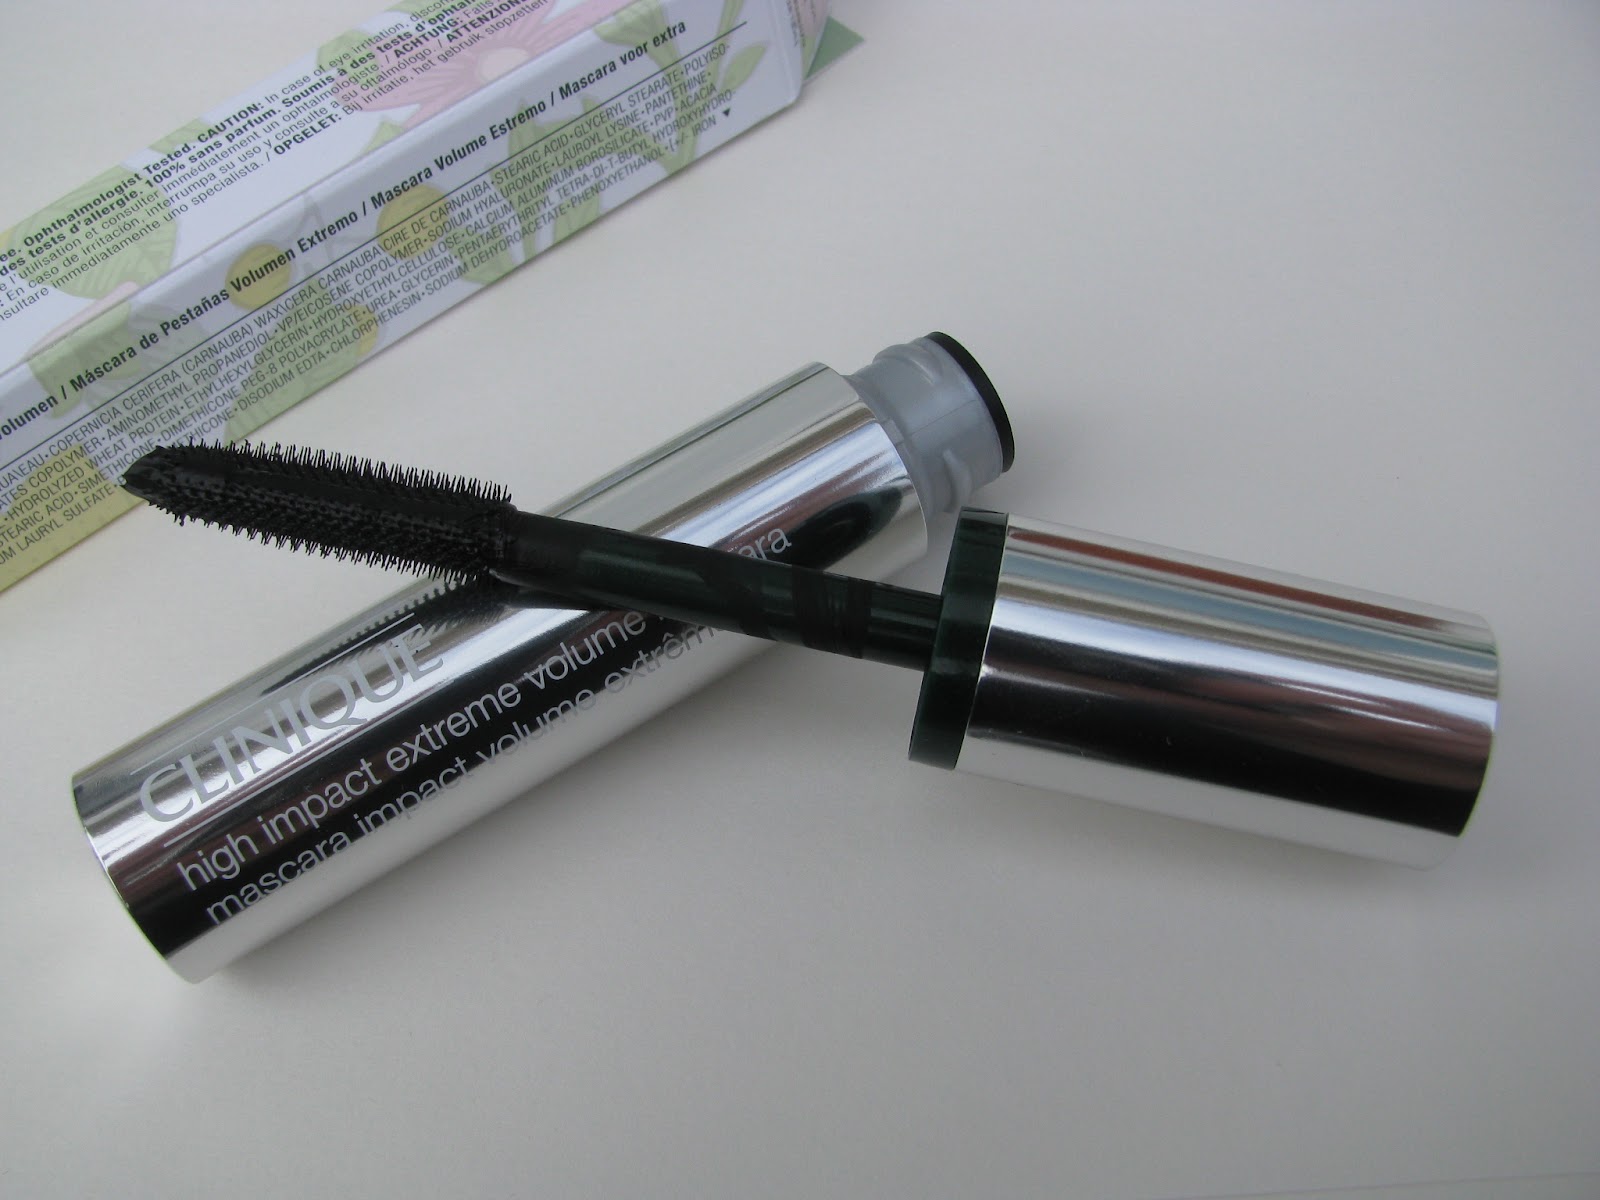 London Beauty Review: Review - Clinique High Impact Volume Extreme Black